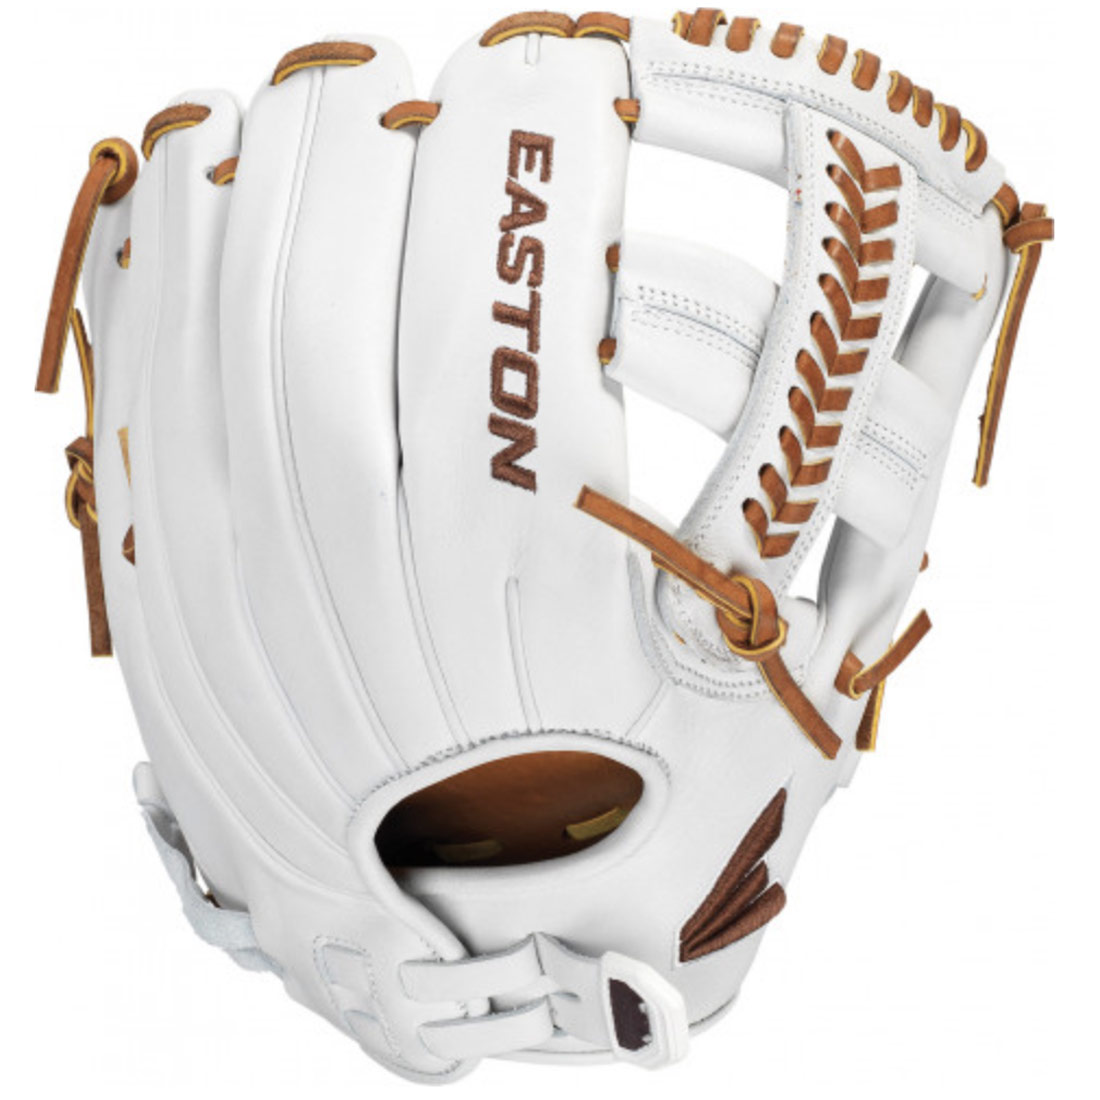 Easton Pro Collection Fastpitch Softball Glove 11.75\" PCFP1175